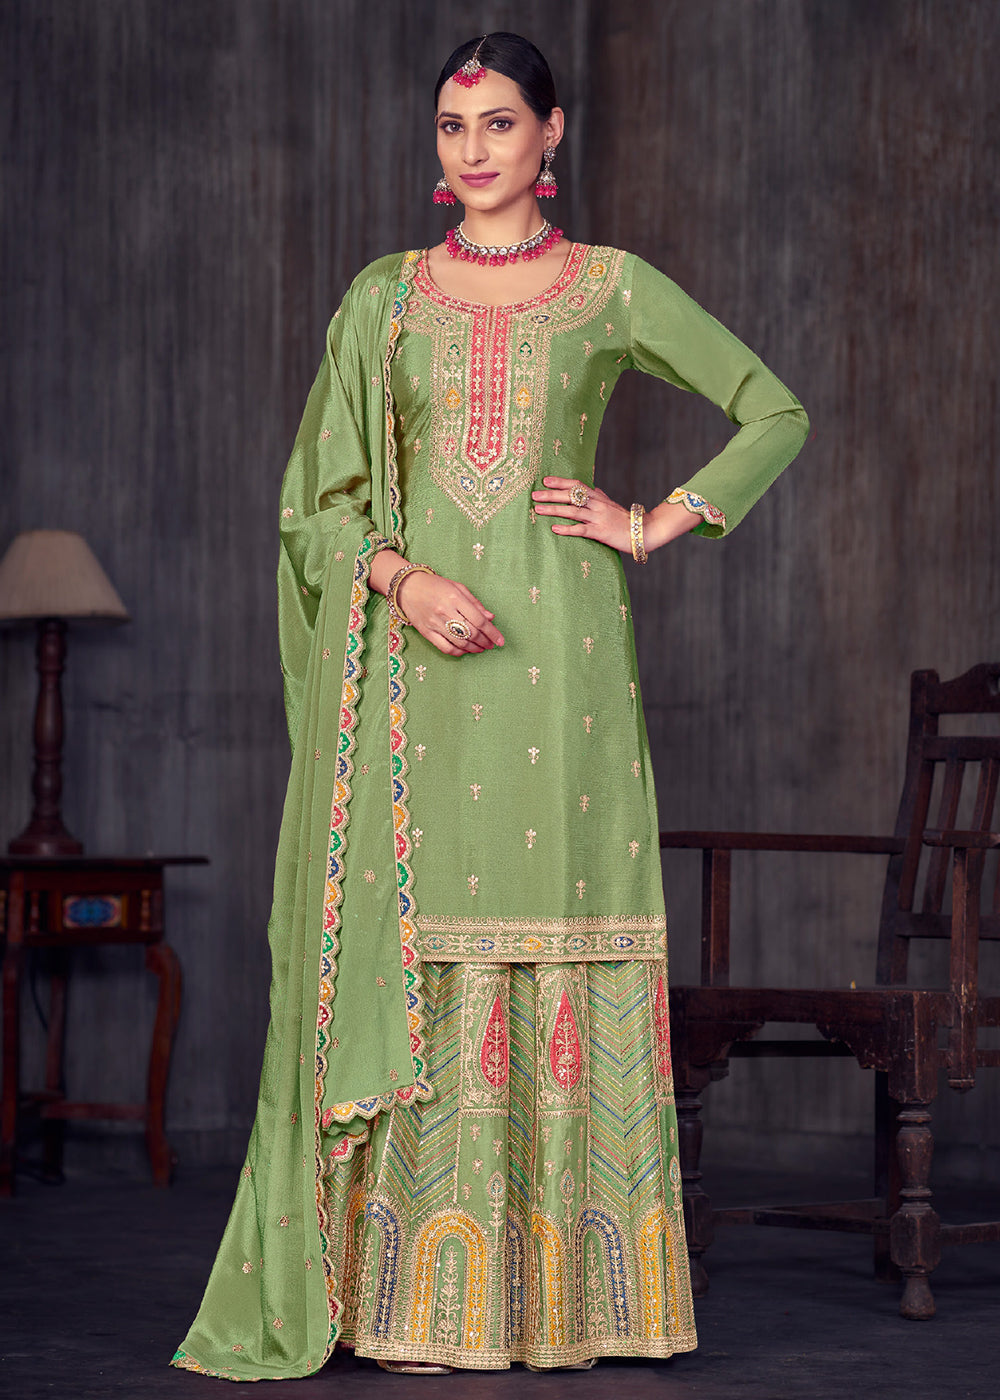 Buy Now Sage Green Heavy Chinnon Embroidered Lehenga Kurti Suit Online in USA, UK, Canada, Germany, Australia & Worldwide at Empress Clothing.